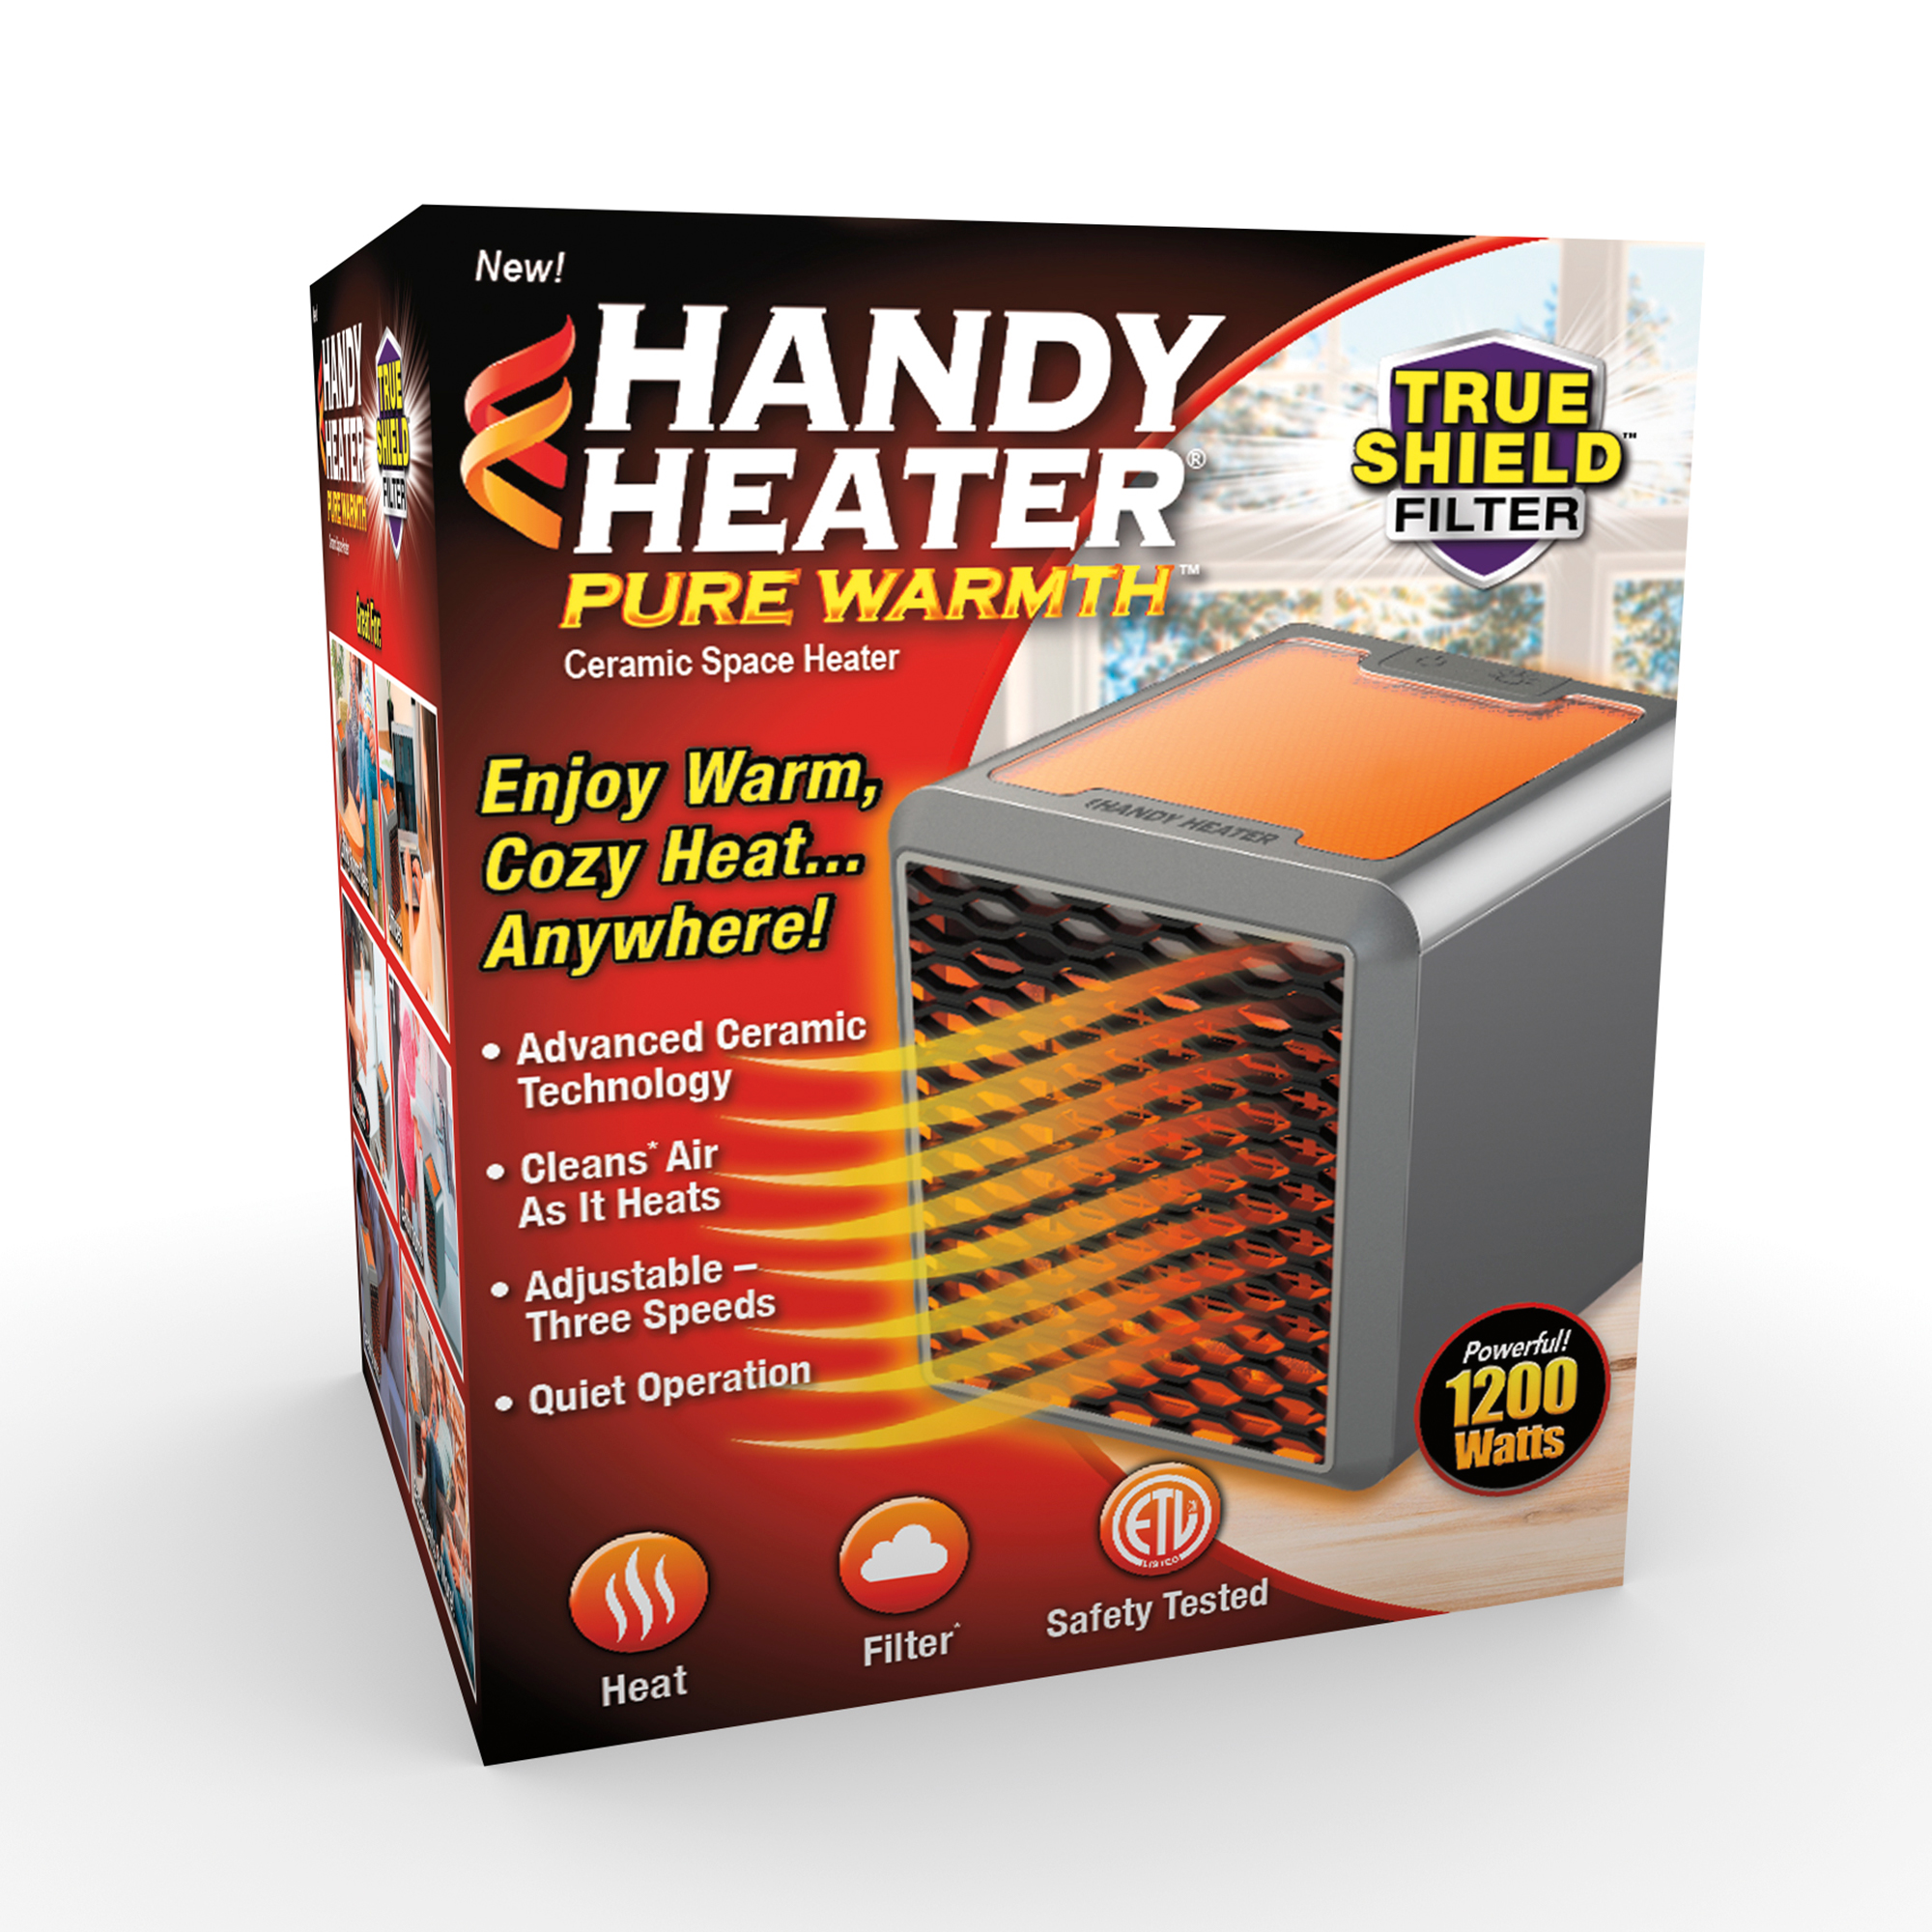 Handy Heater Pure Warmth Powerful Ceramic Space Heater, As Seen On TV -  Walmart.com